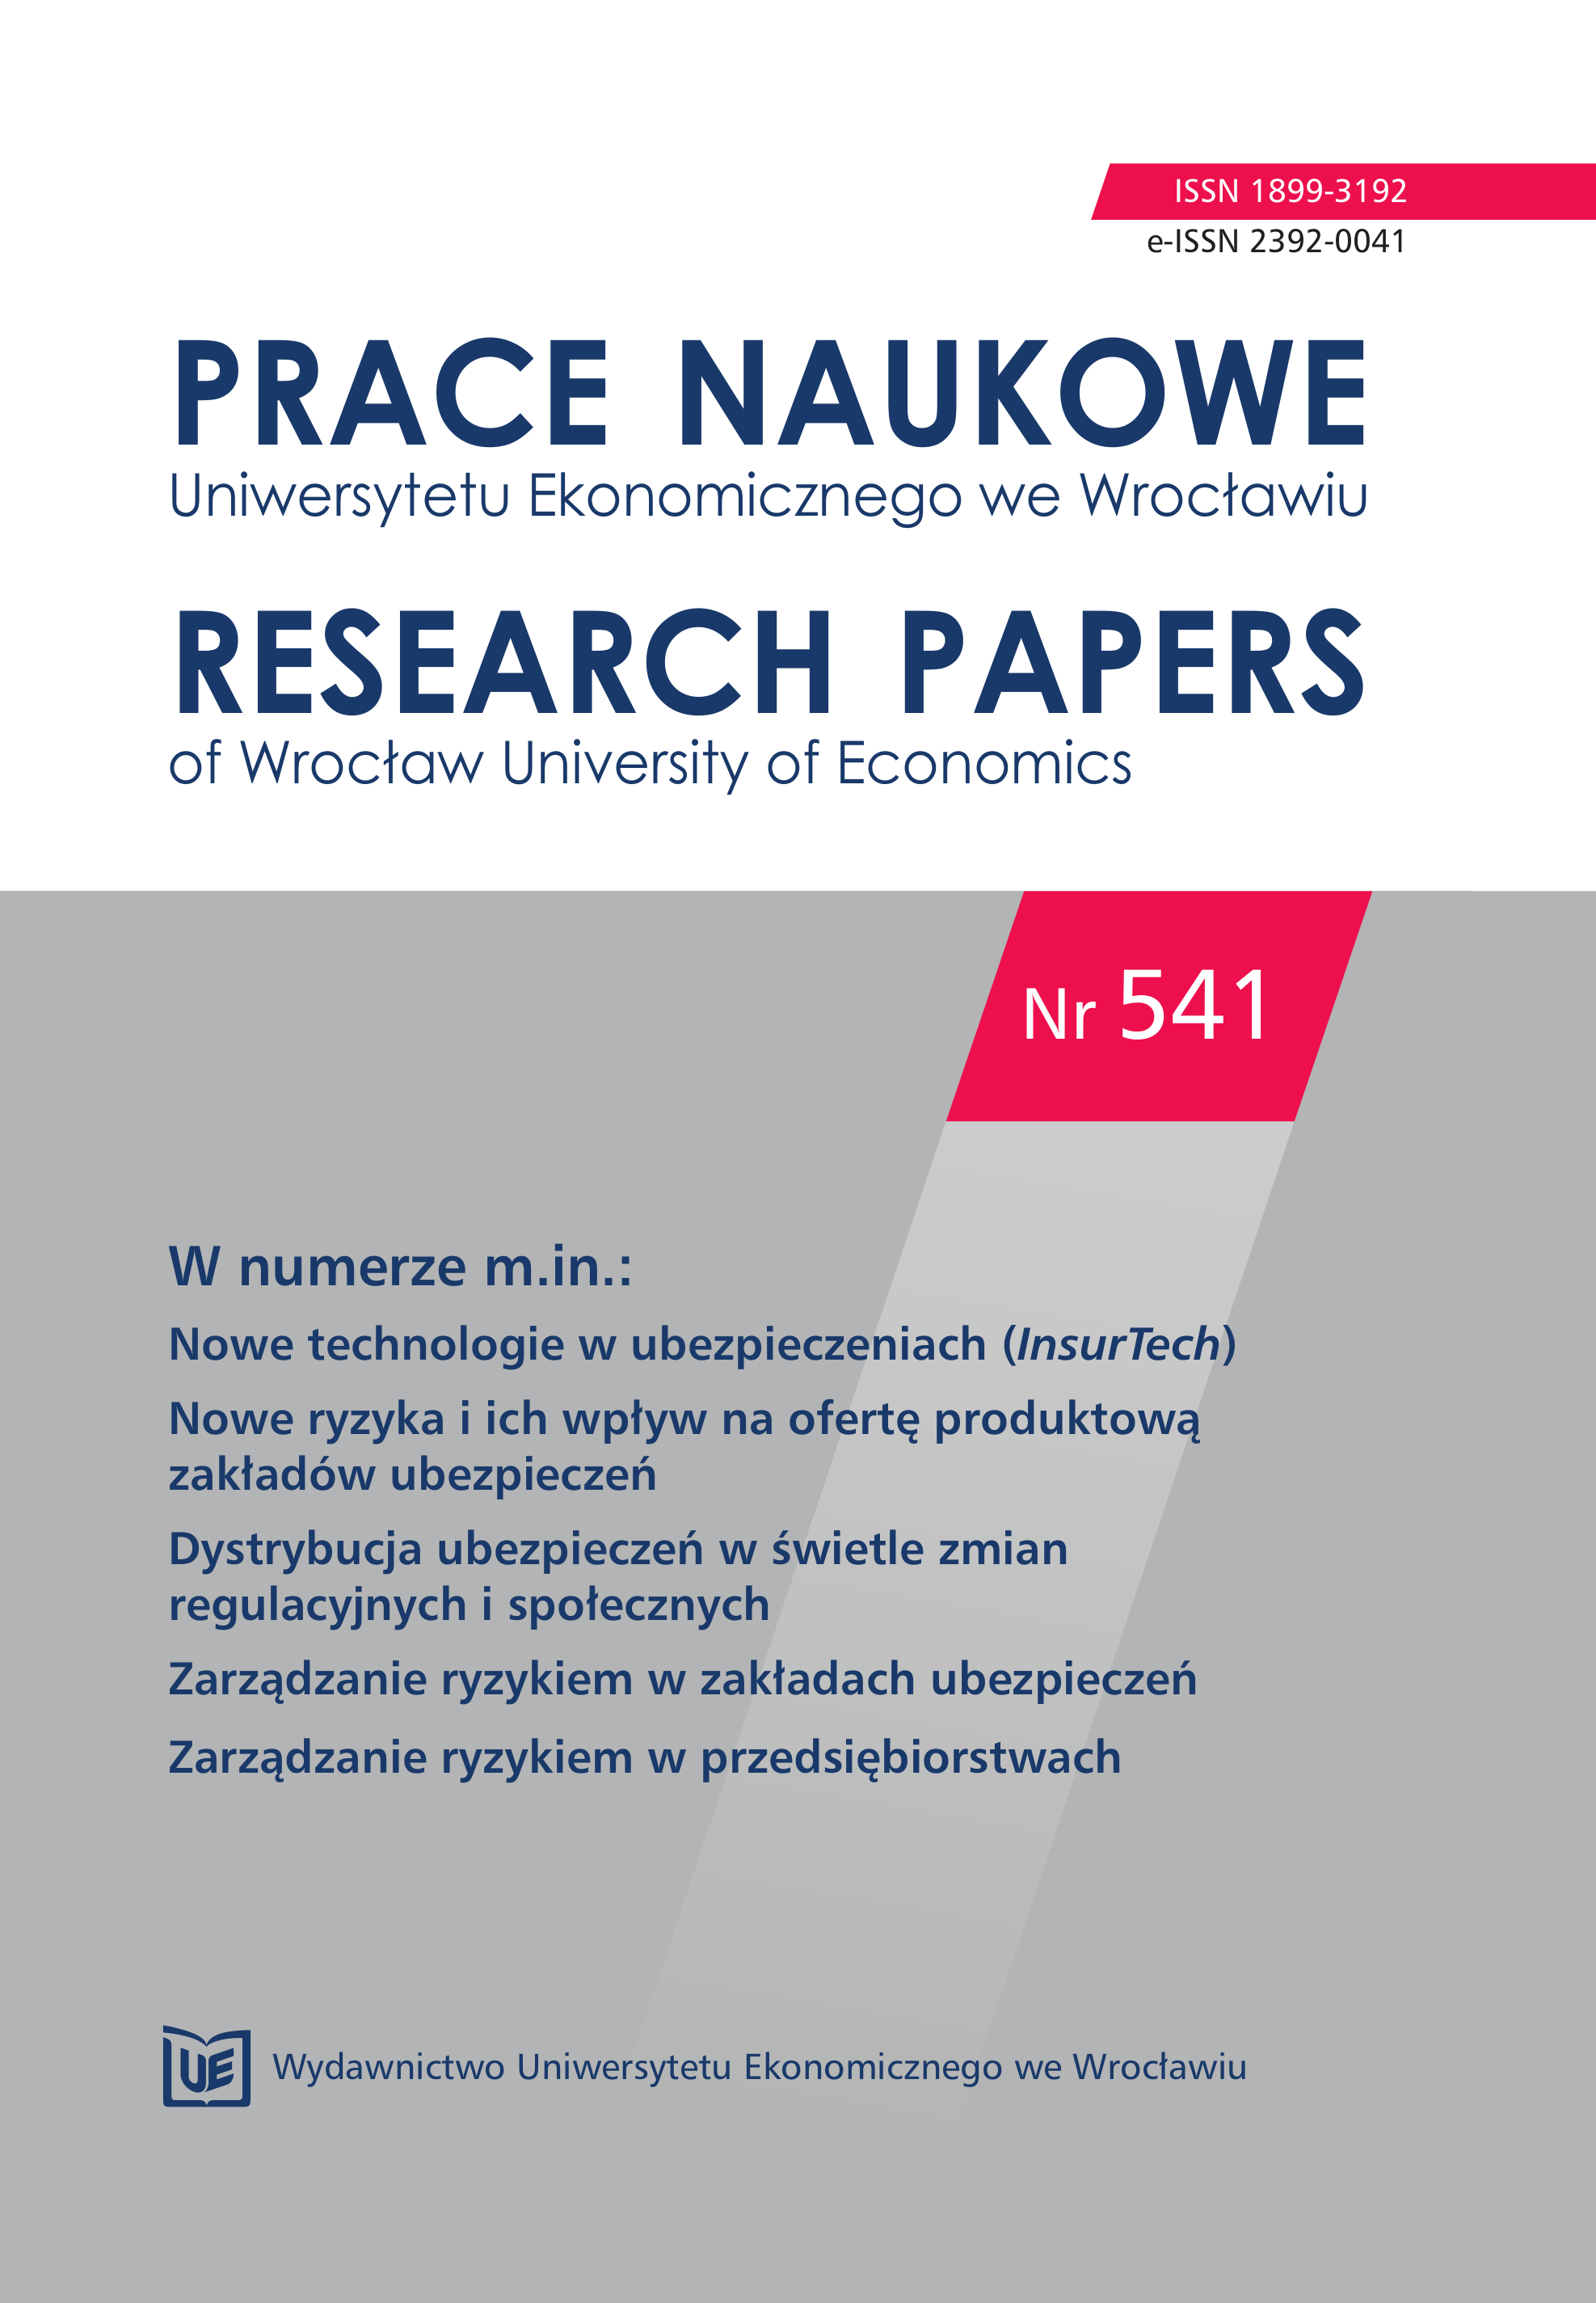 Bancassurance market in Poland in 2009-2016 Cover Image